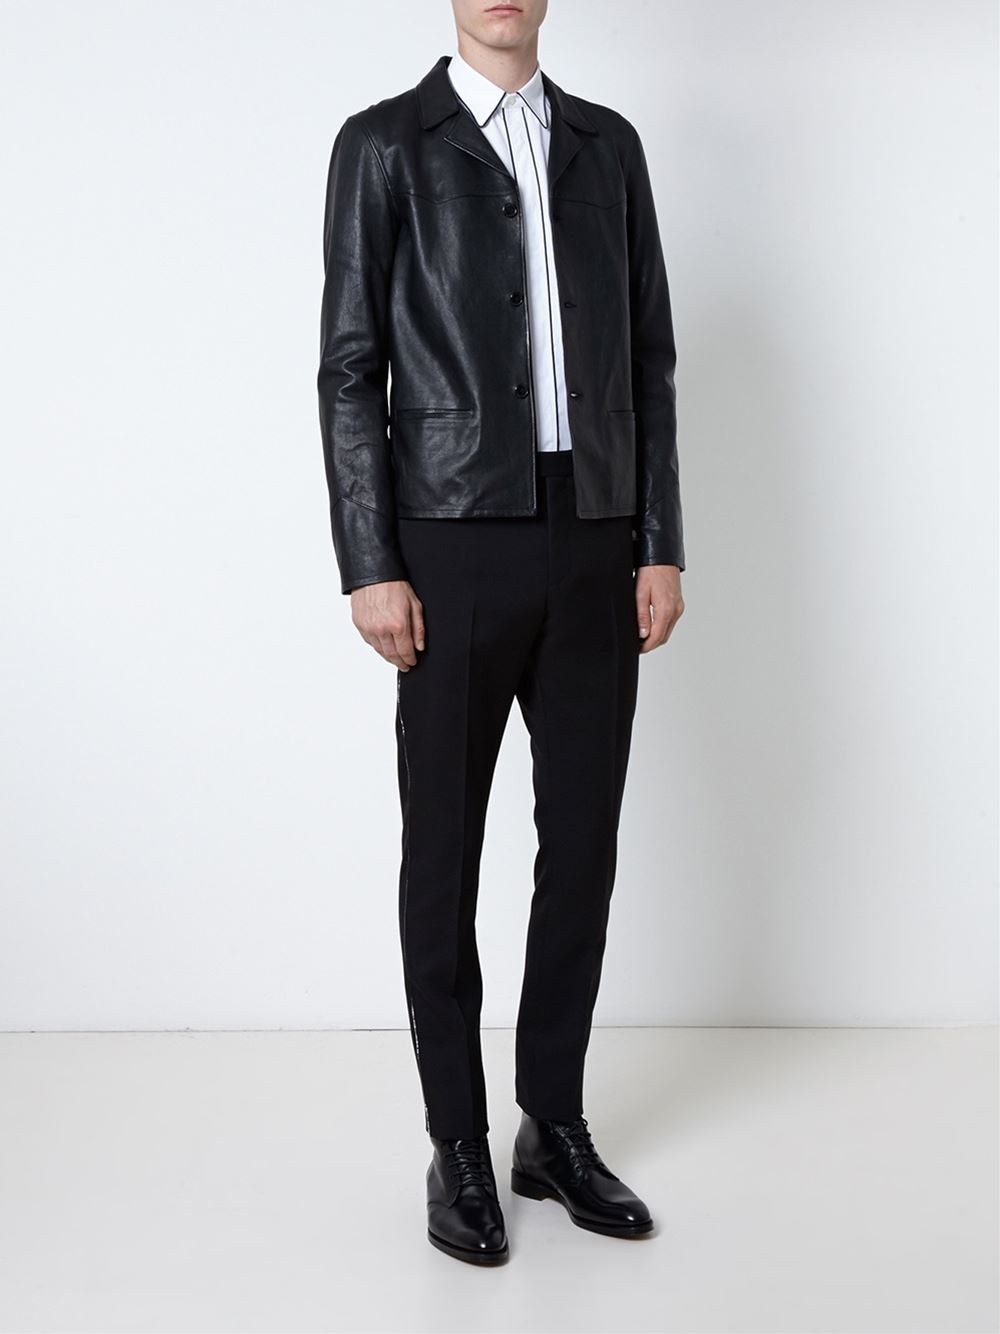 Lyst - Saint Laurent Dress Shirt With Piping in Black for Men